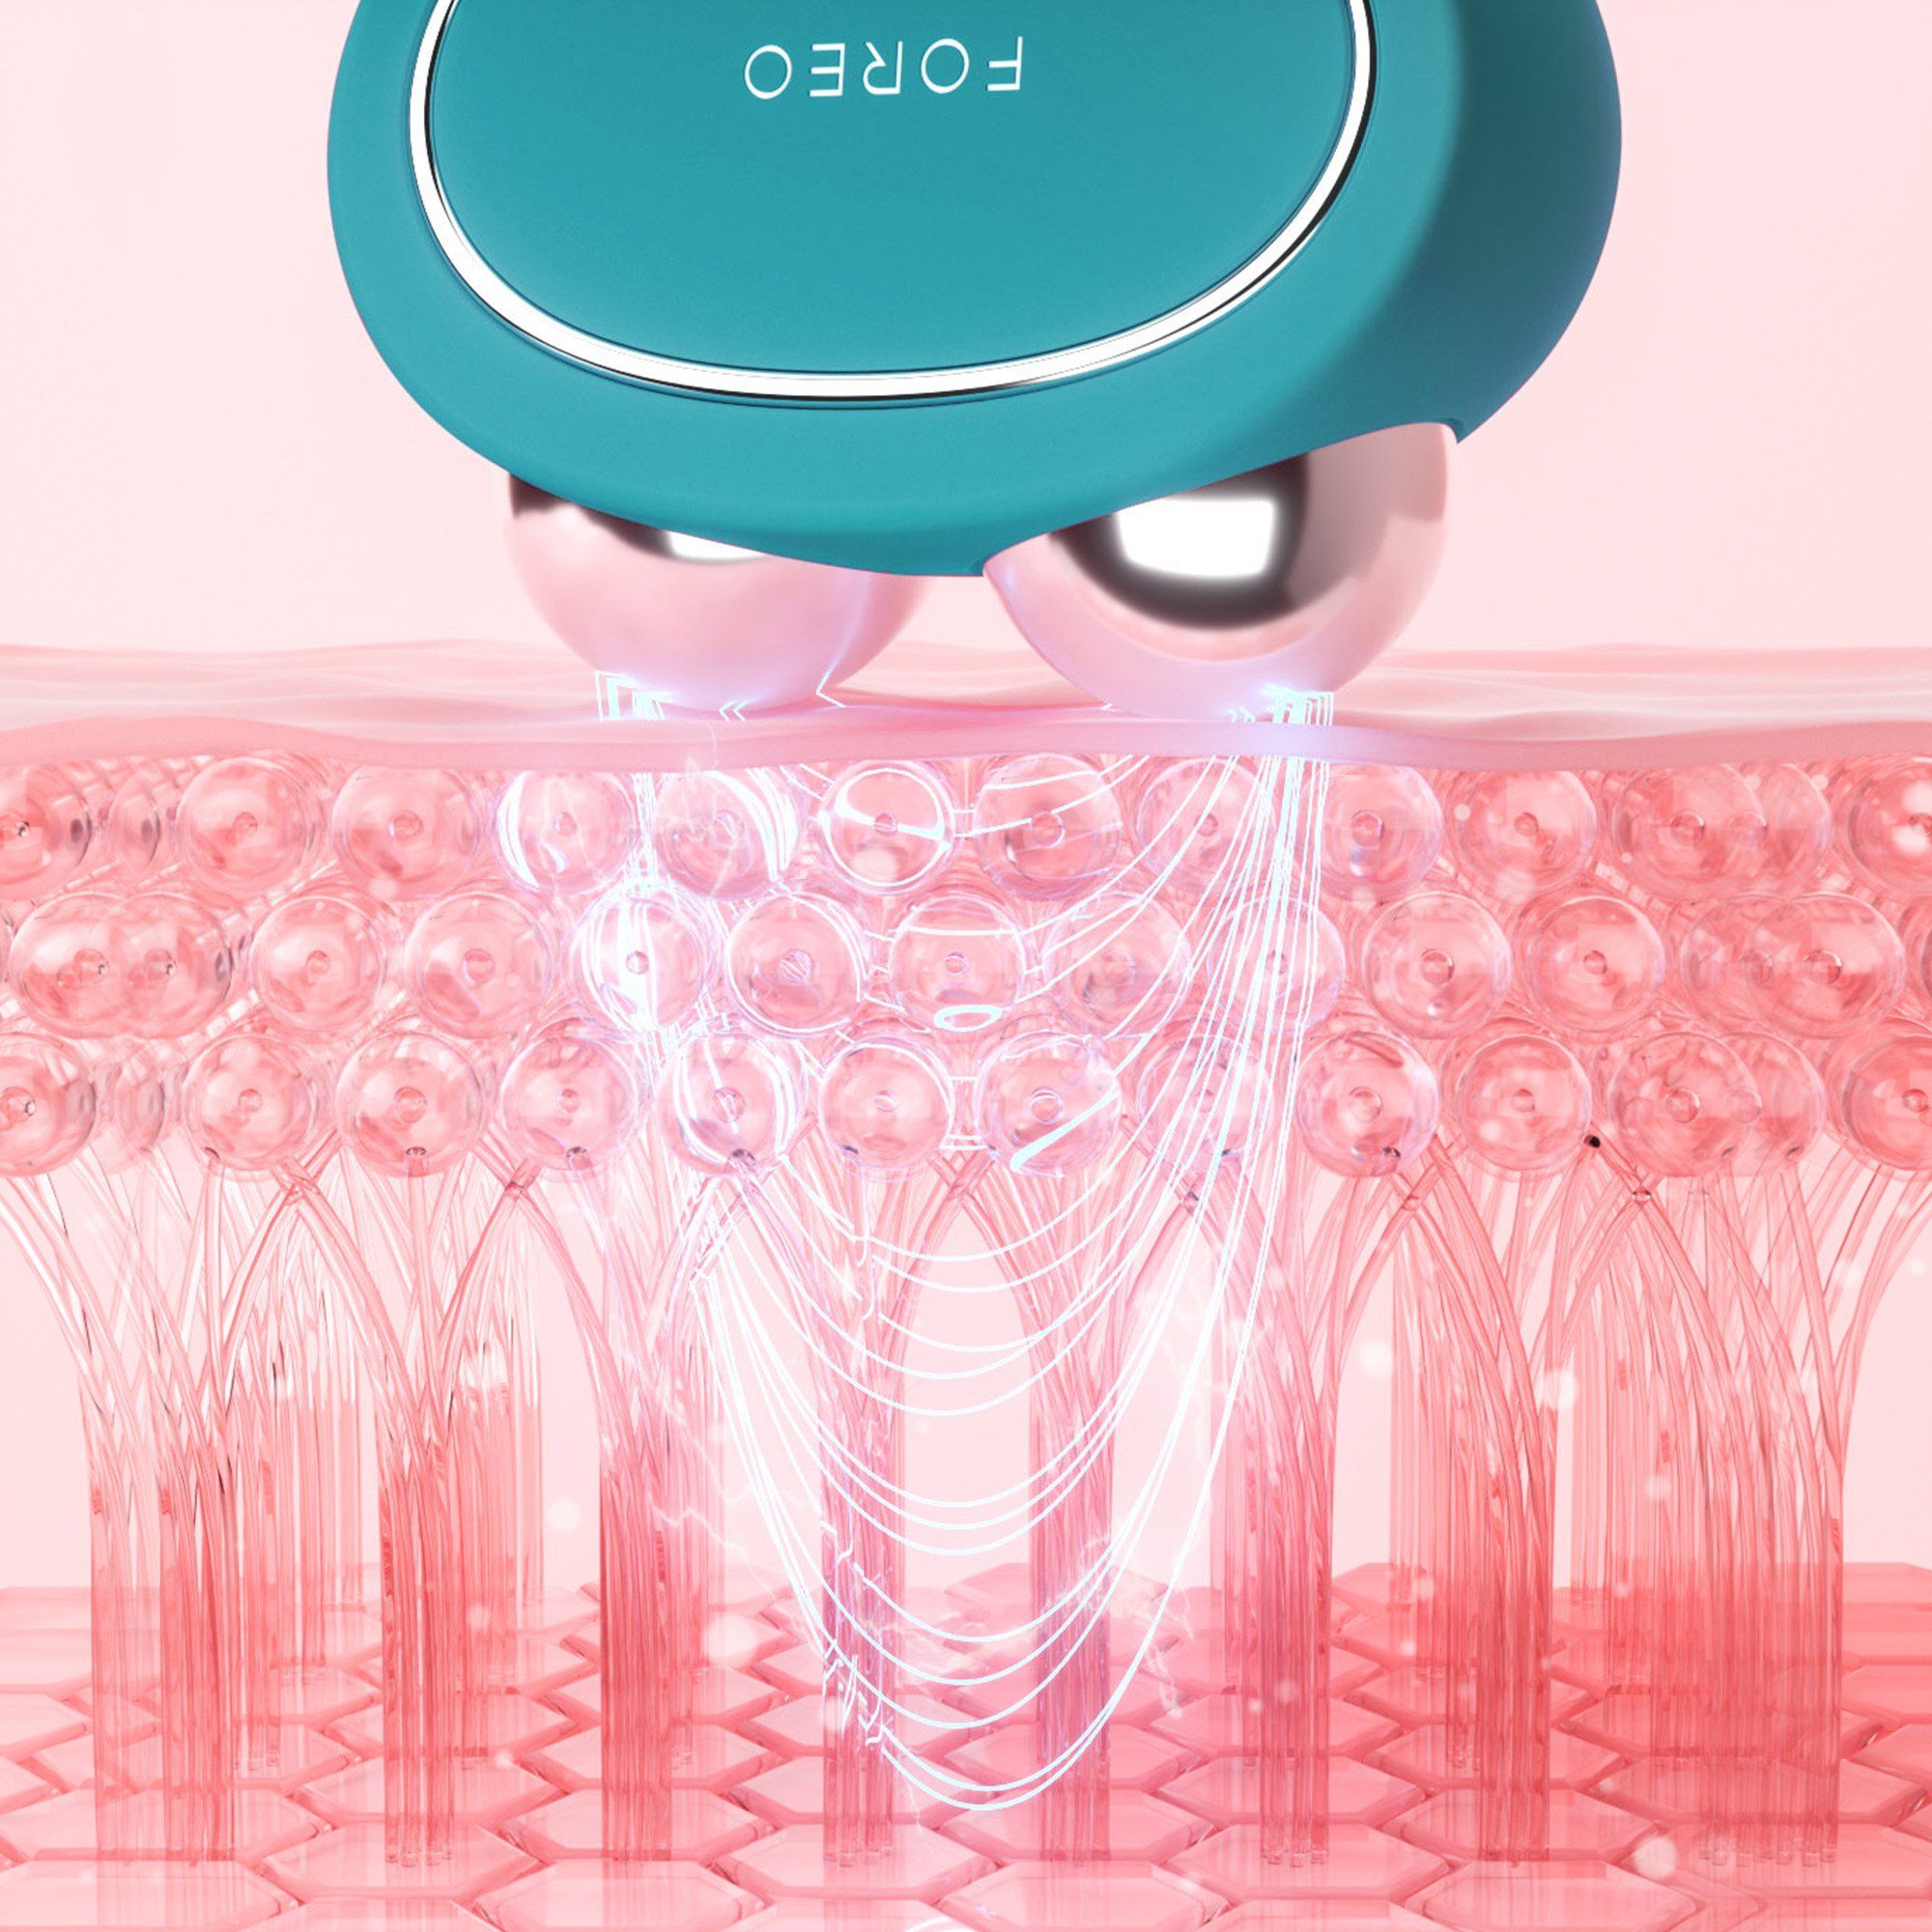 FOREO BEAR™ 2 Microcurrent Facial Toning Device - Evergreen